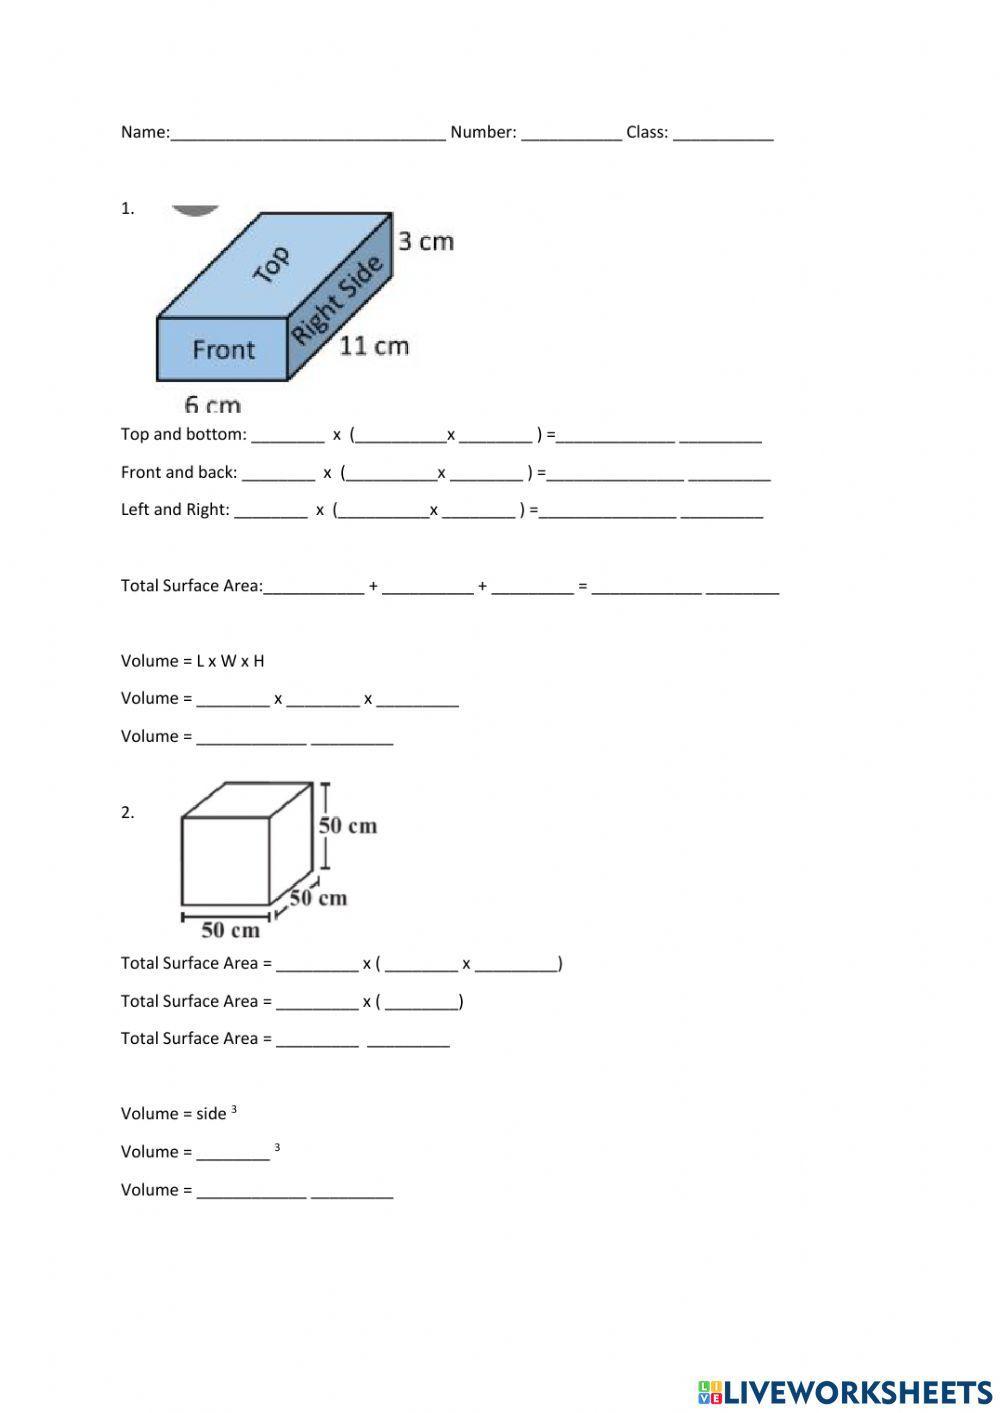 Surface Area and Volume of a Cuboid and Cube